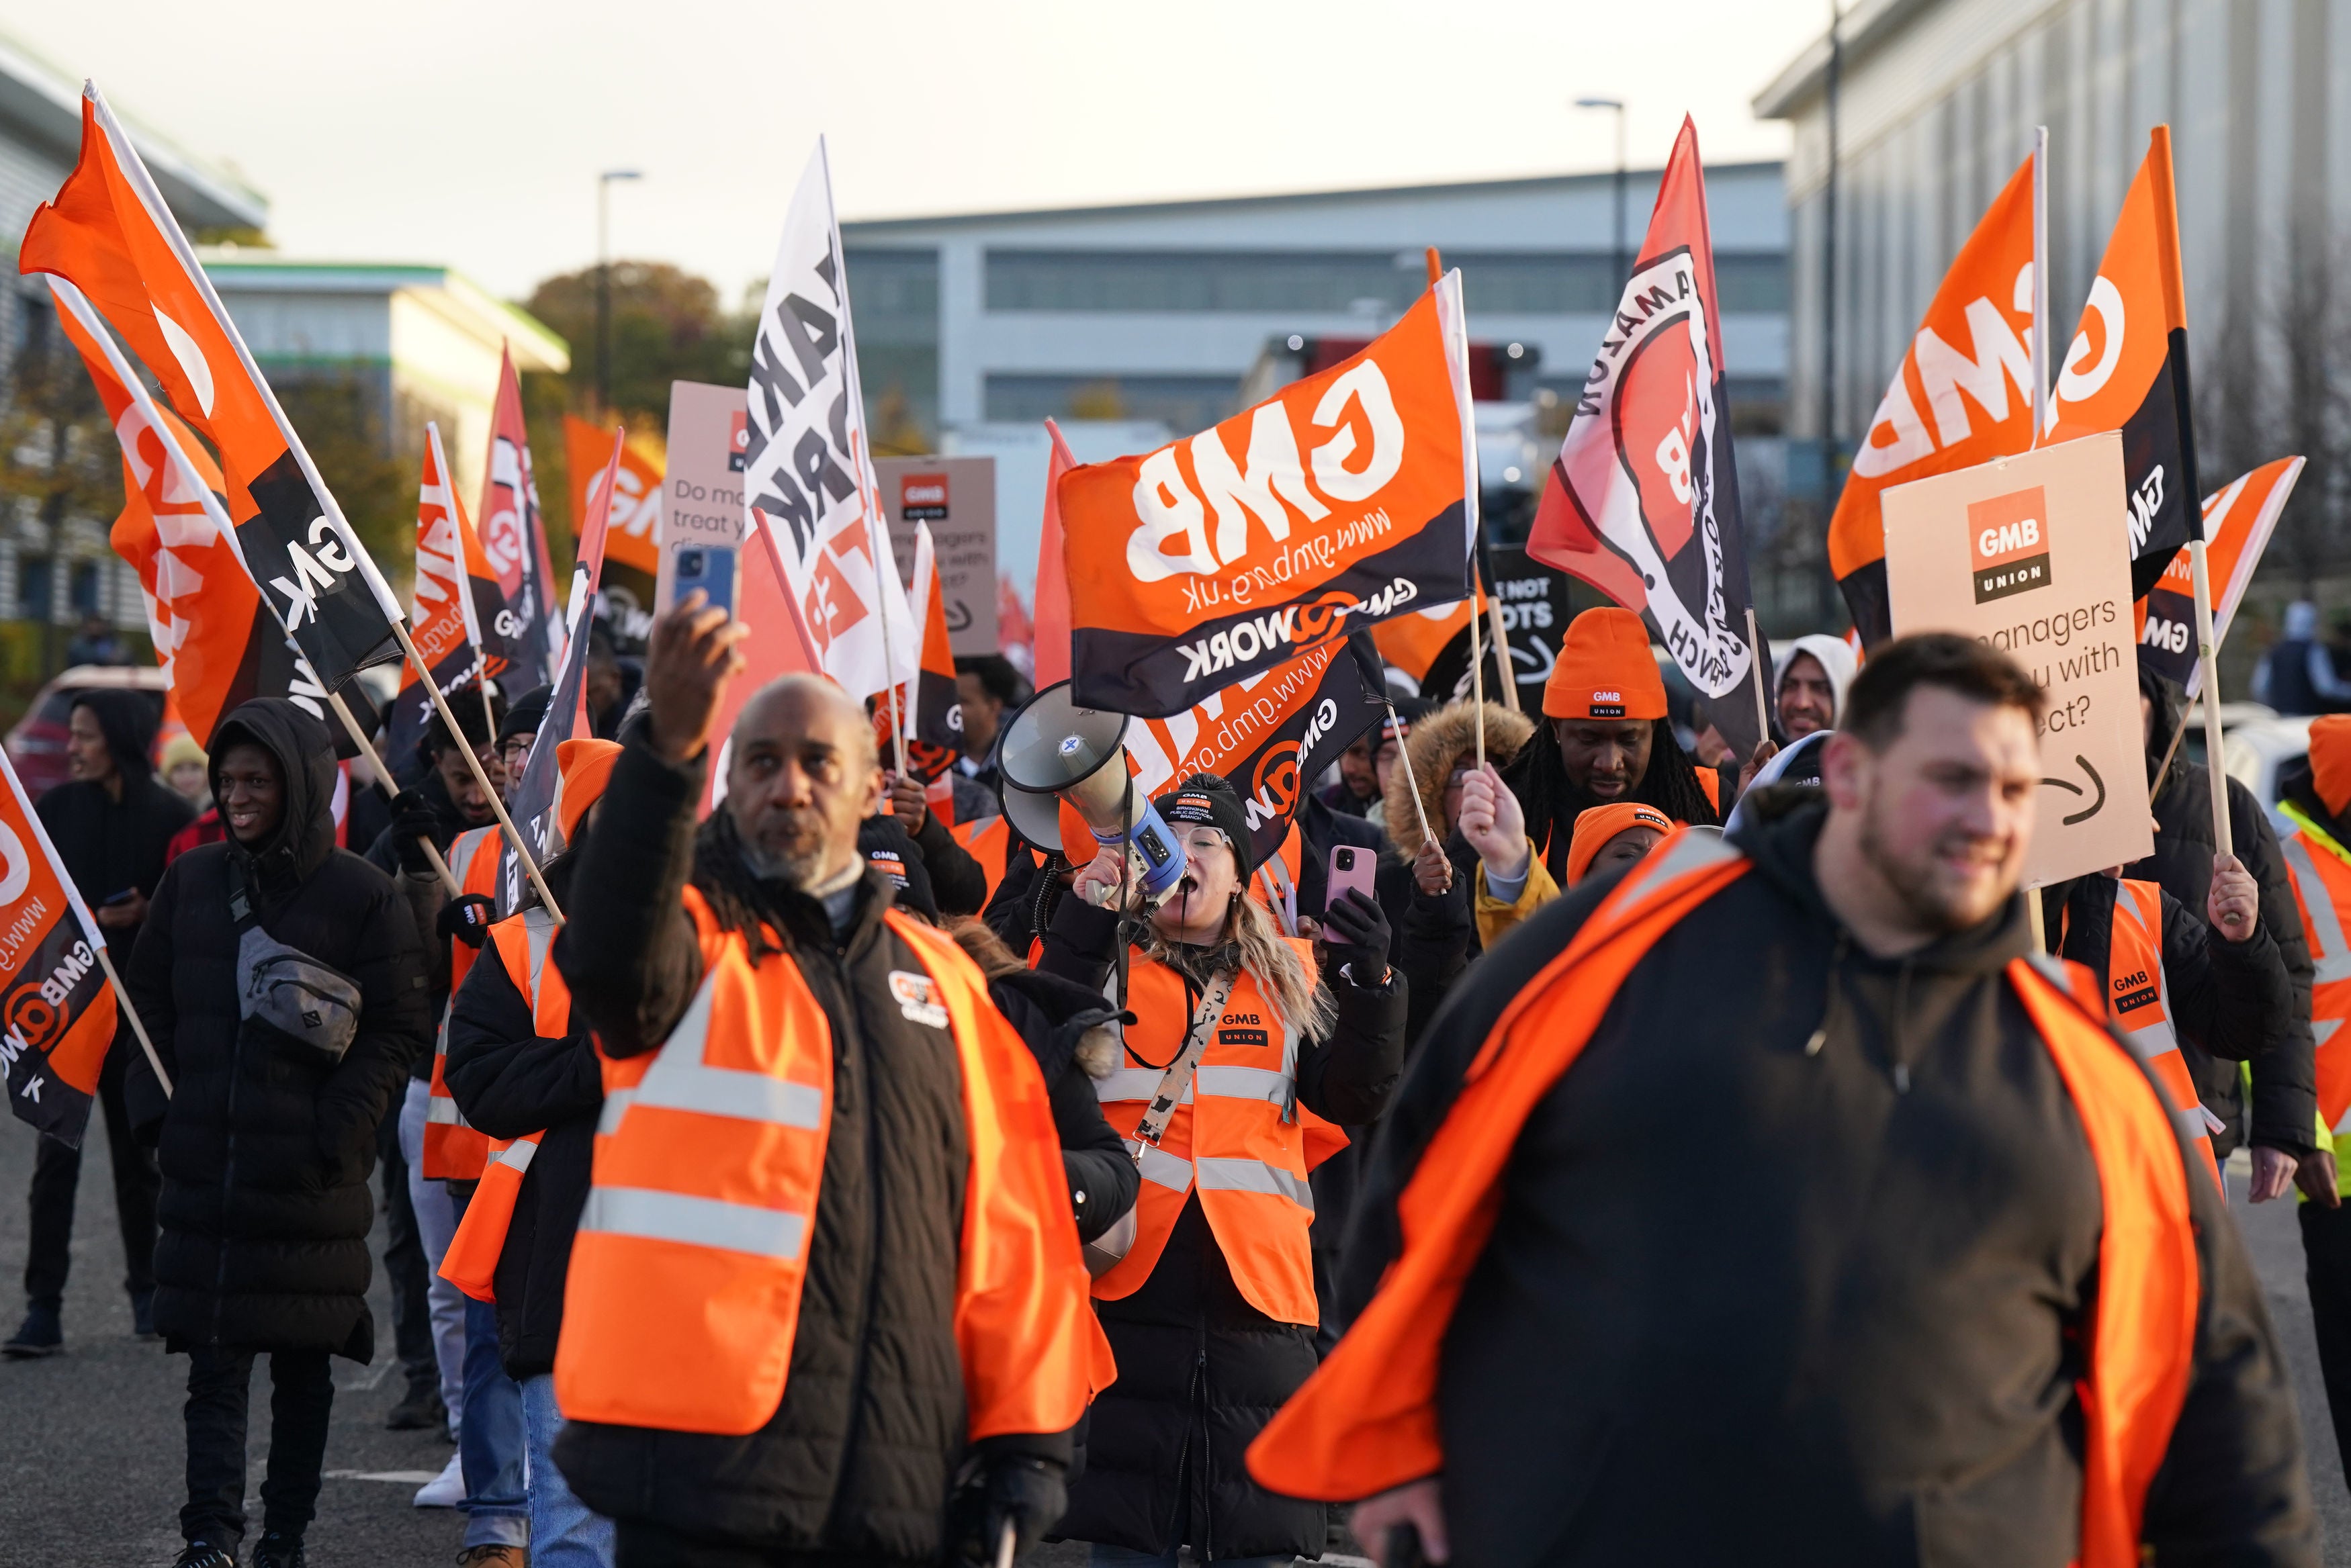 amazon, unions, workers, strike, amazon, black friday, black friday hit by strikes as over 1000 amazon workers walk out in pay dispute